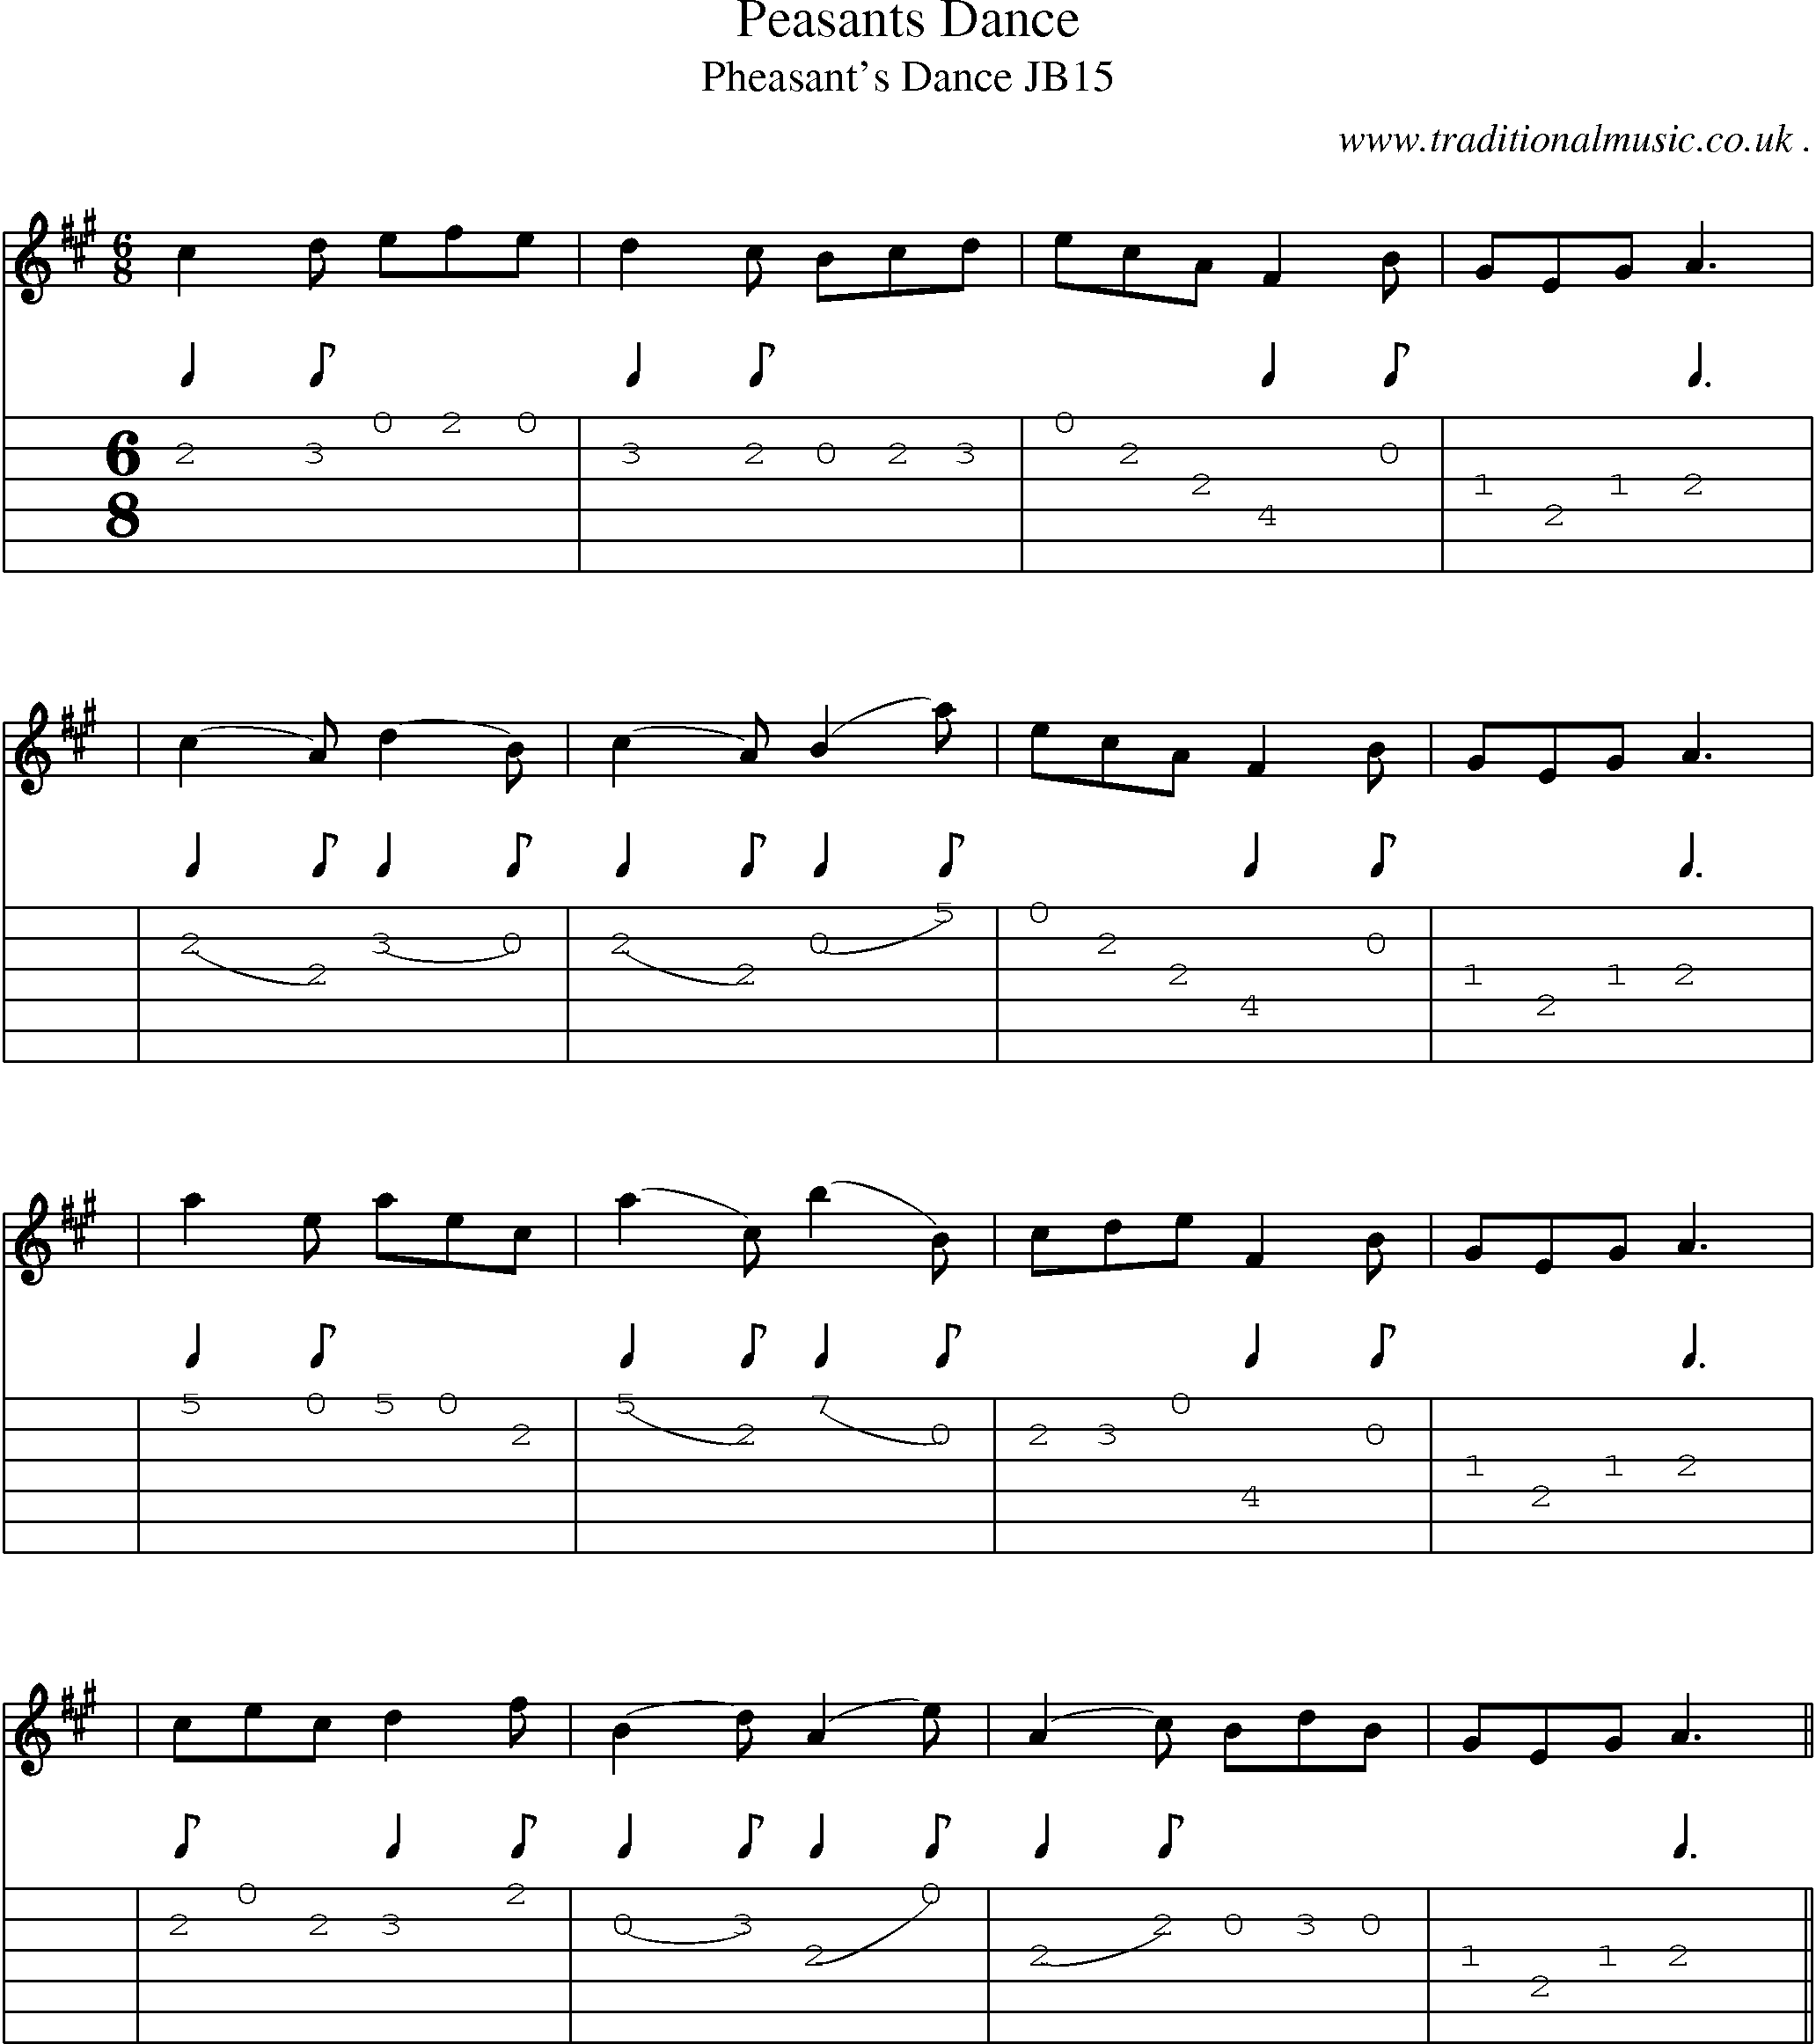 Sheet-Music and Guitar Tabs for Peasants Dance